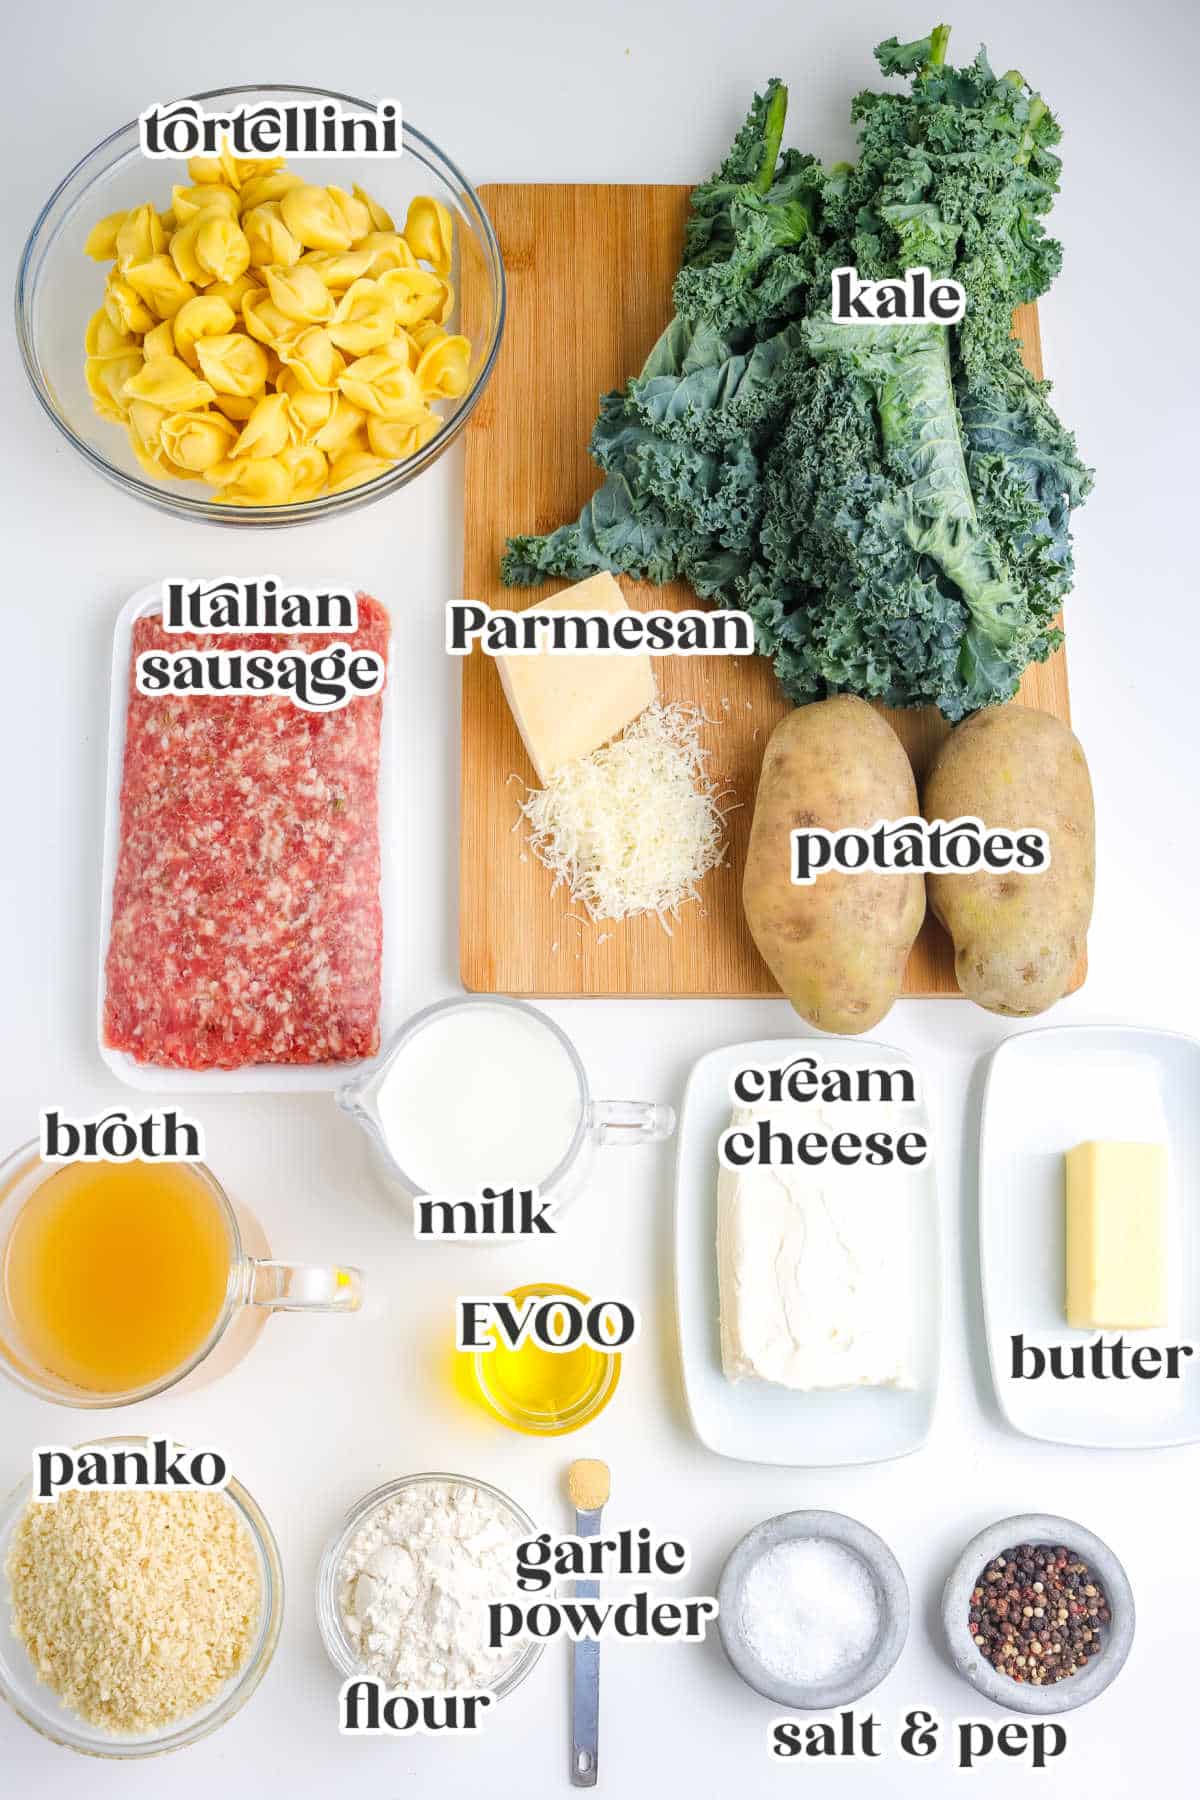 All of the ingredients needed to make this recipe and they're labeled.